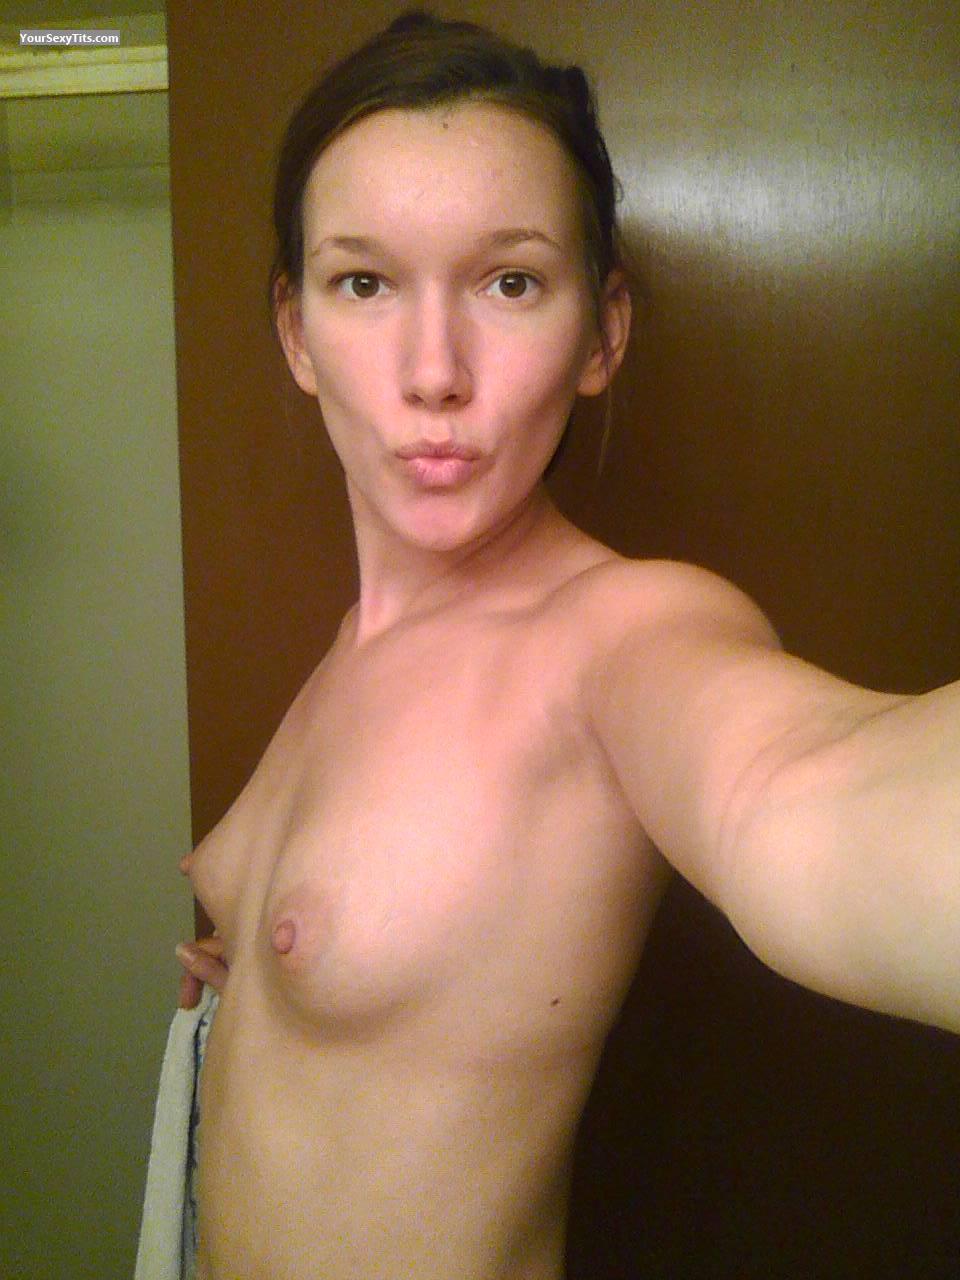 My Very small Tits Topless Selfie by College Girl